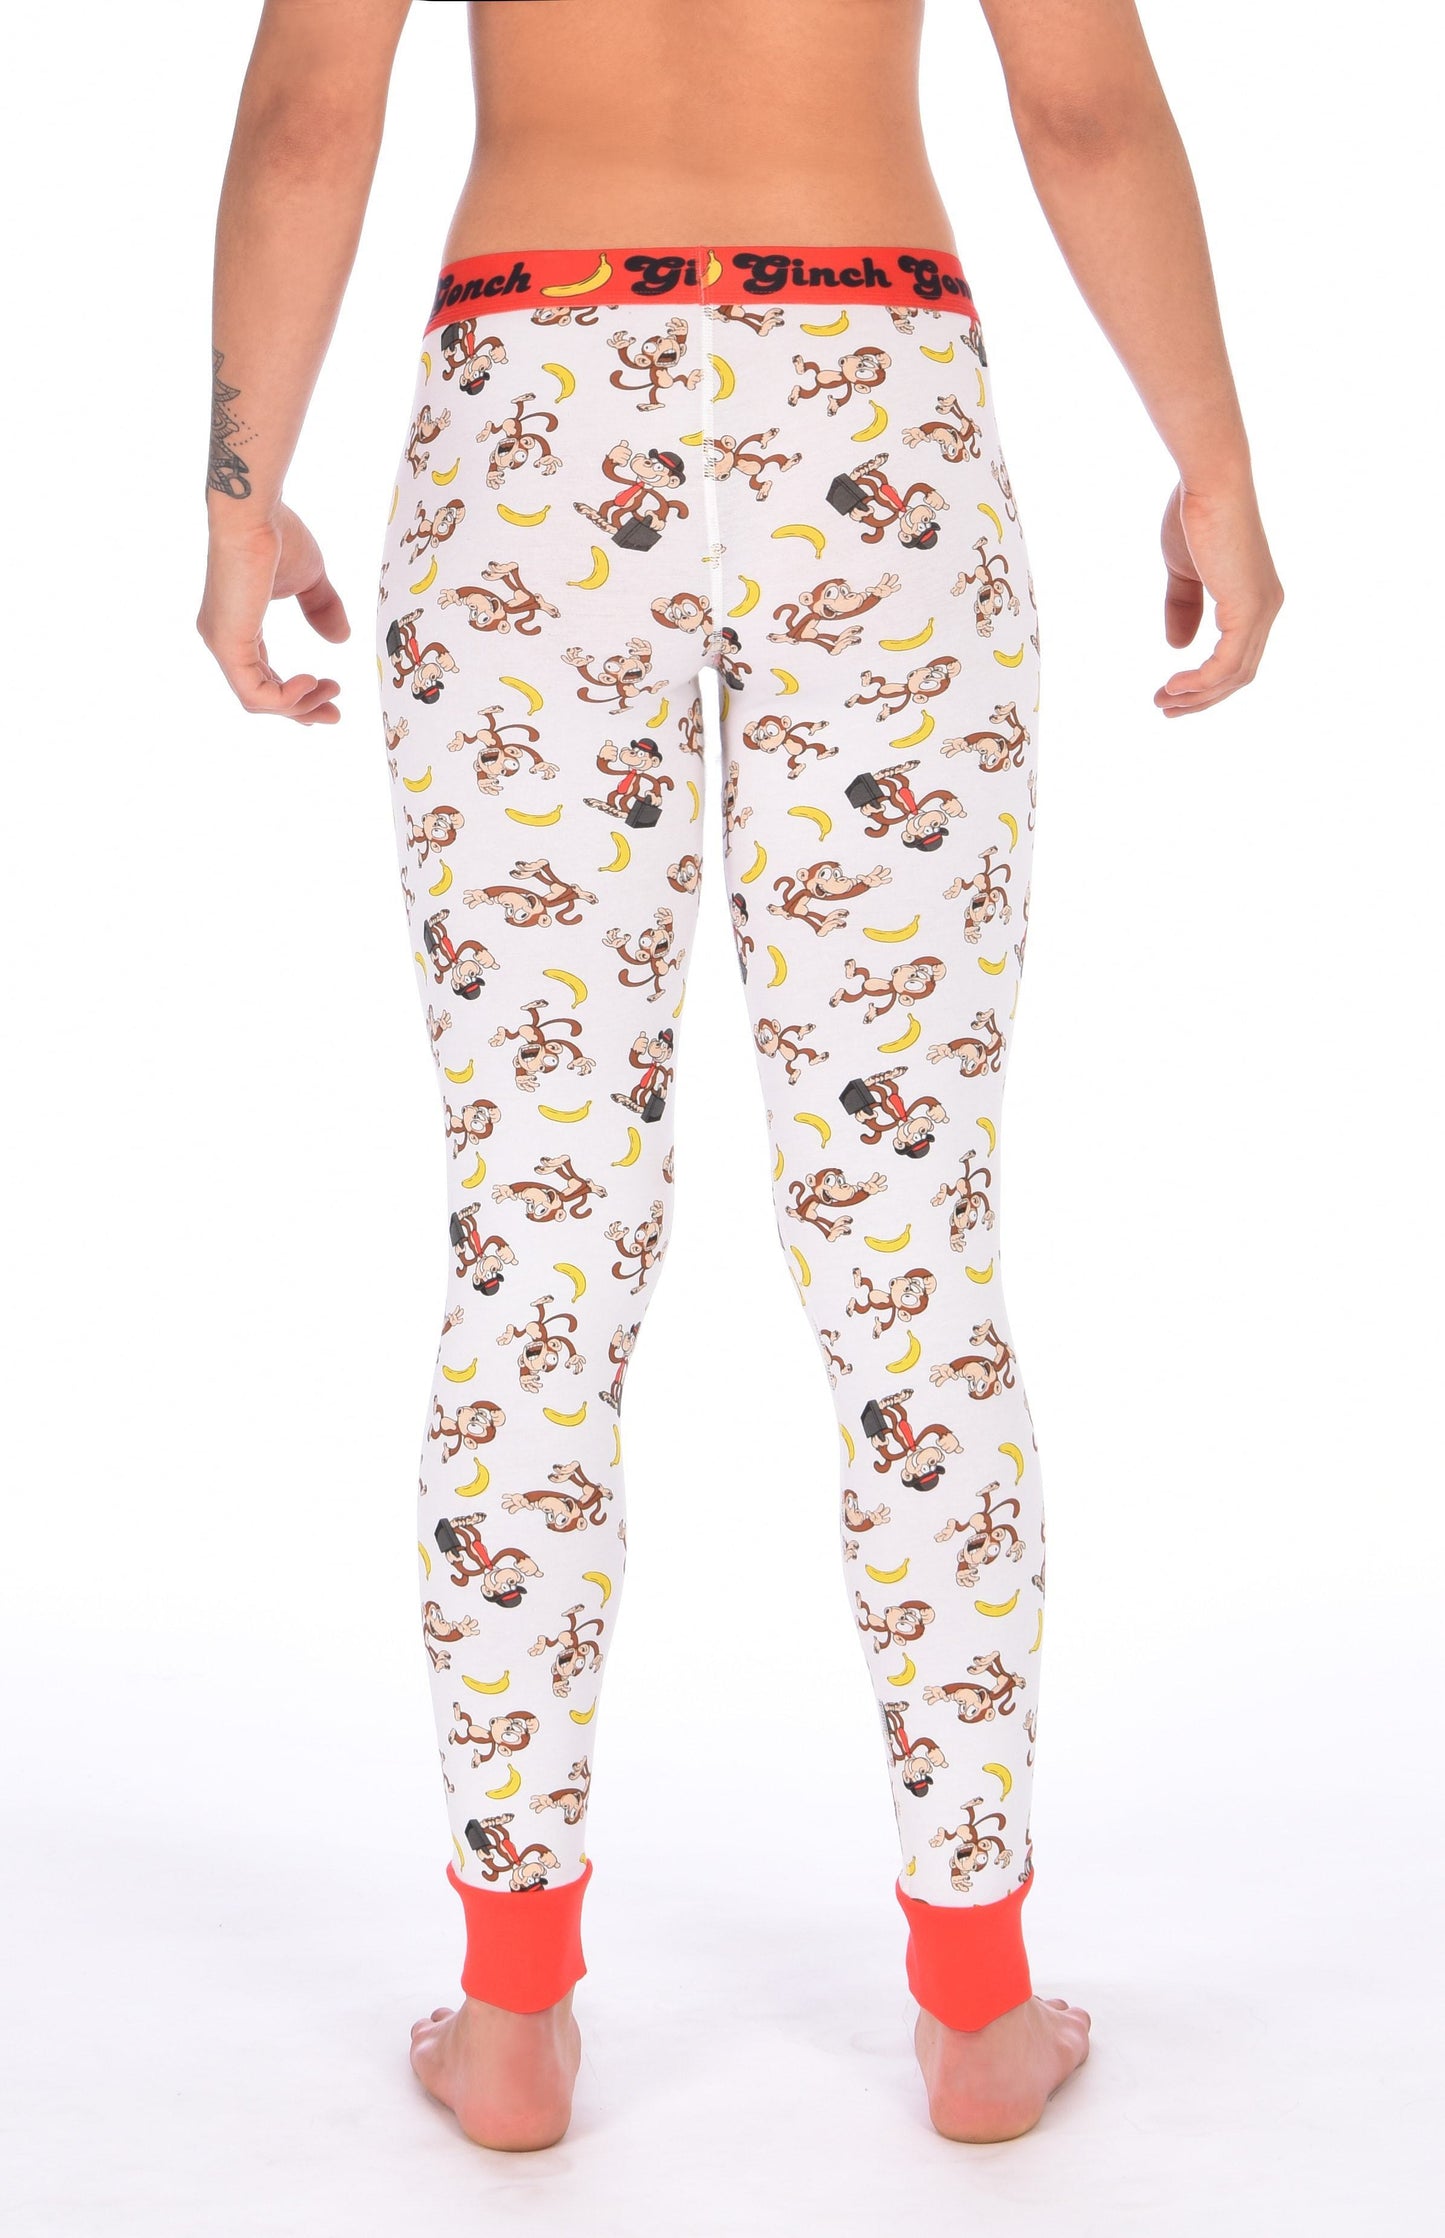 GG Ginch Gonch Gone Bananas leggings long johns men's long underwear white fabric with monkeys and bananas red trim and red printed waistband y front back